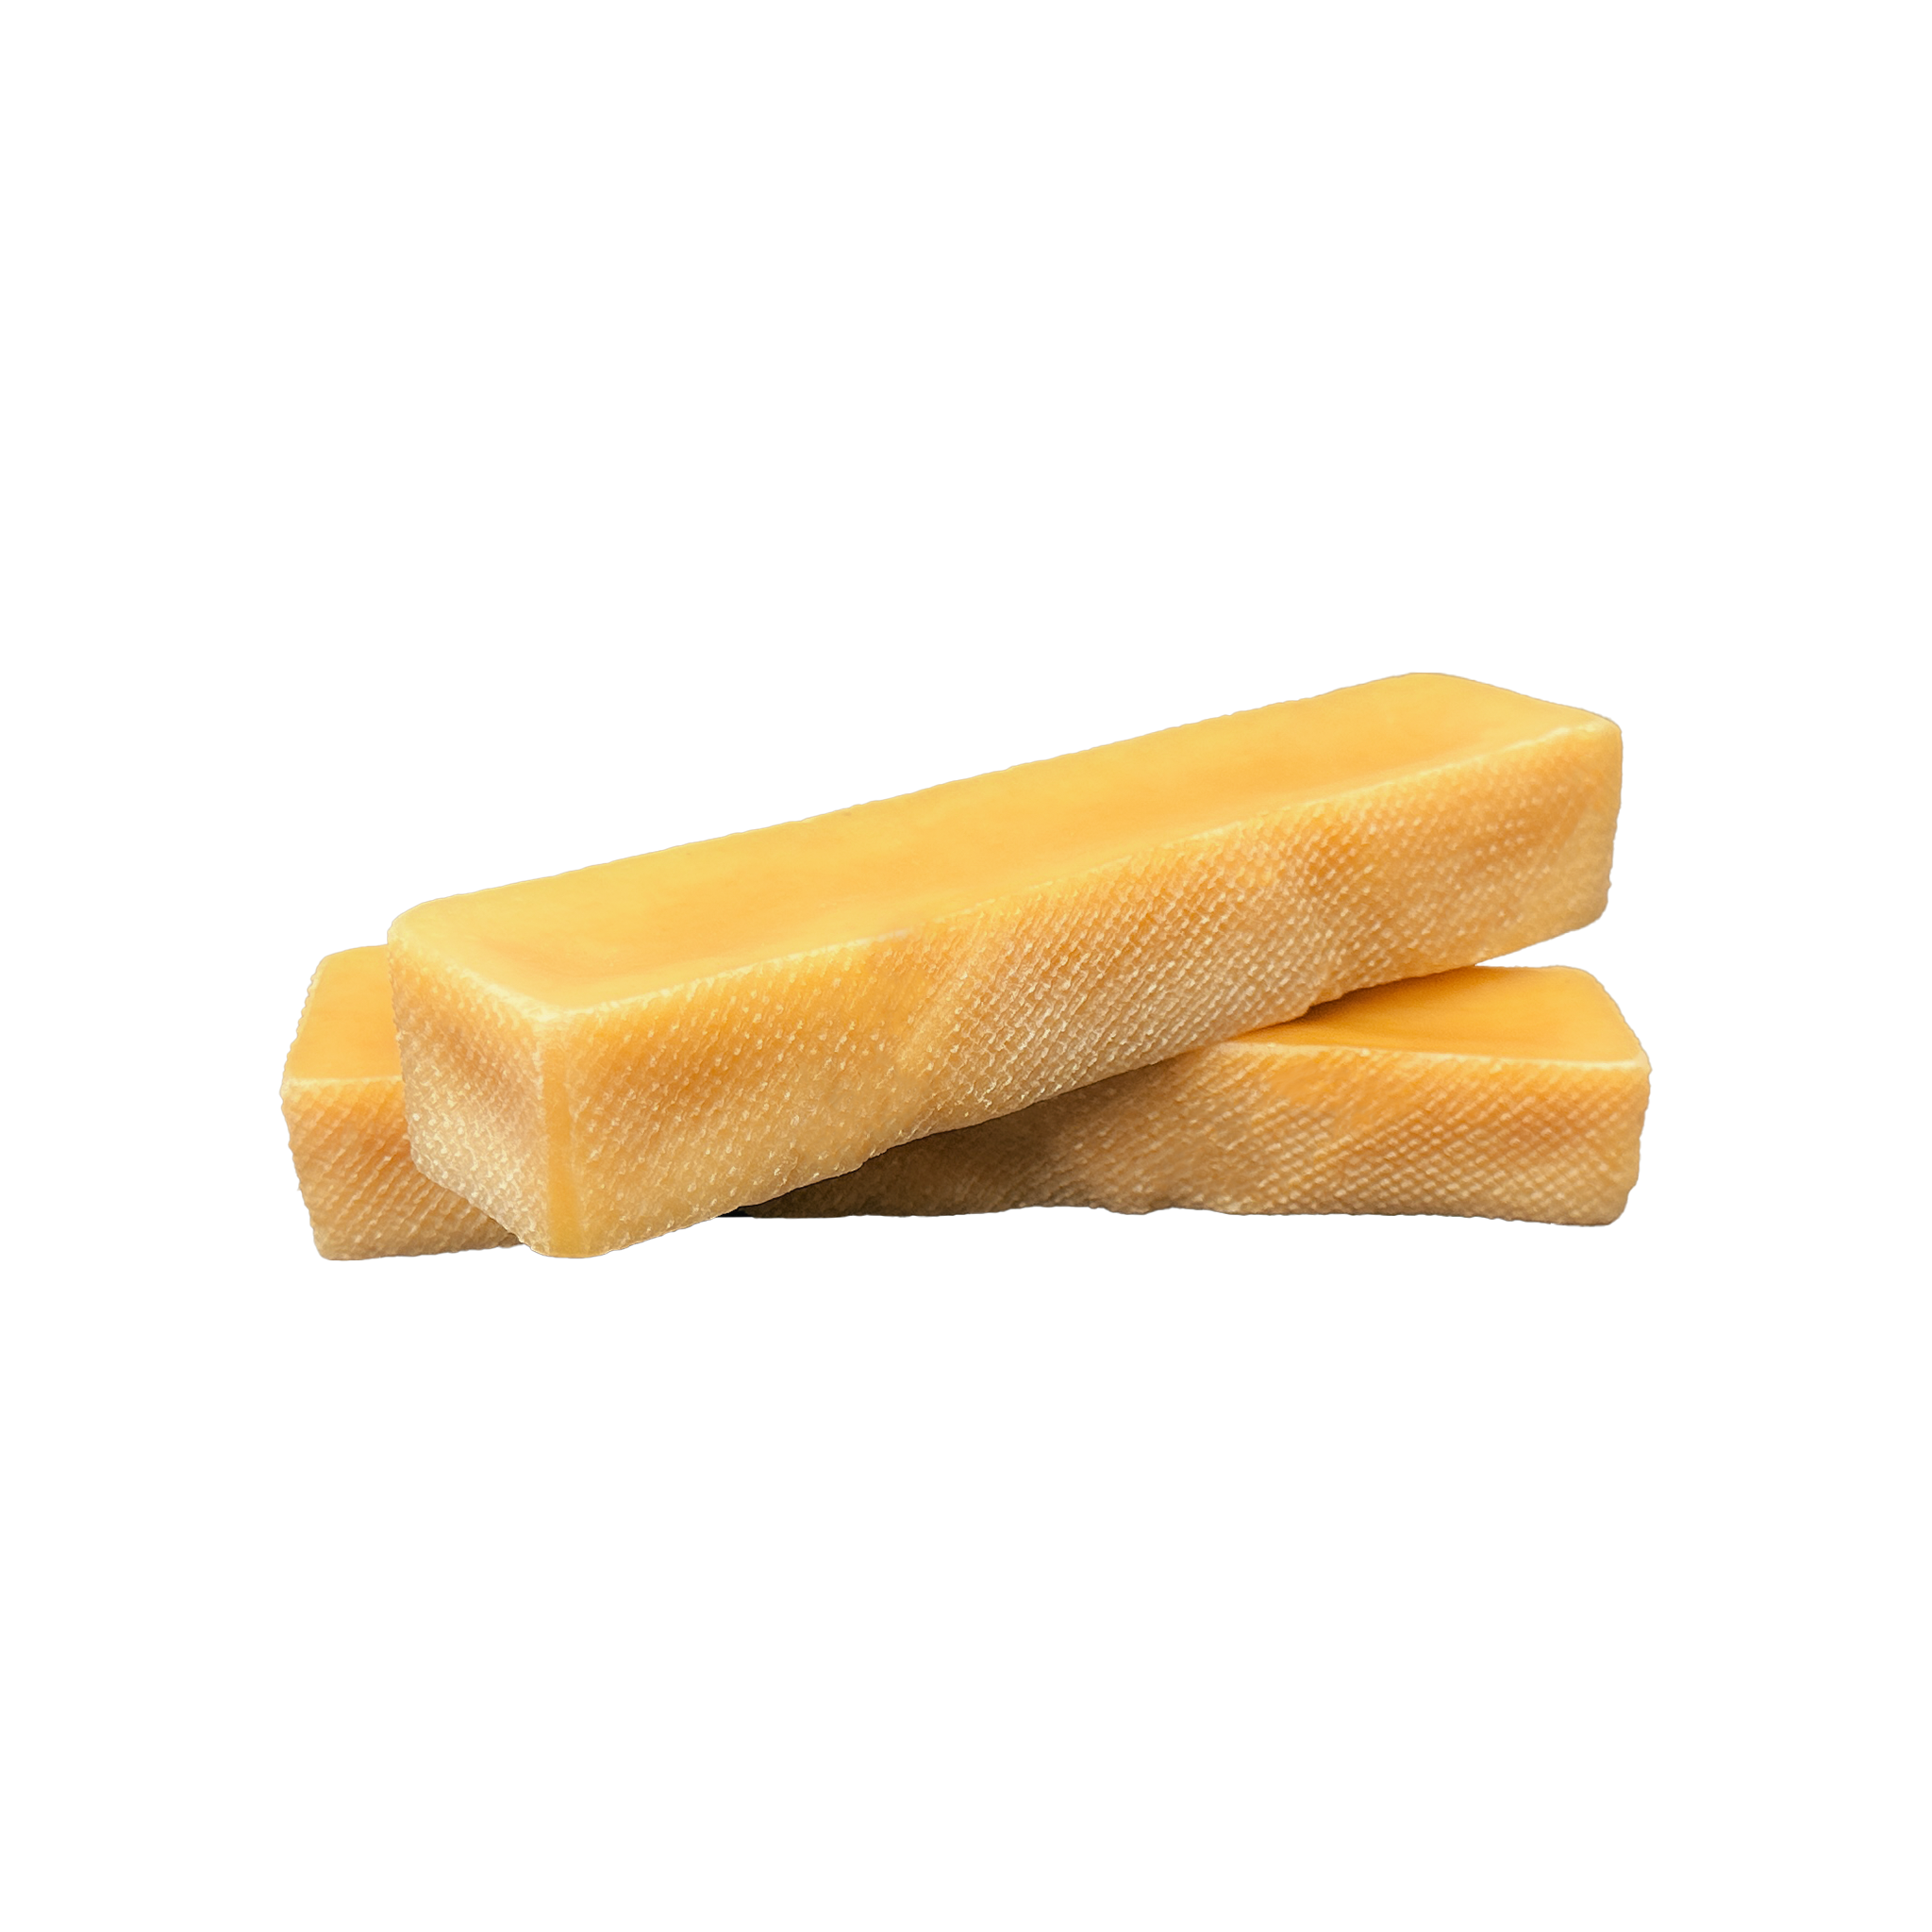 XLarge YAK CHEWS (For Dogs Under 80 Lbs.)